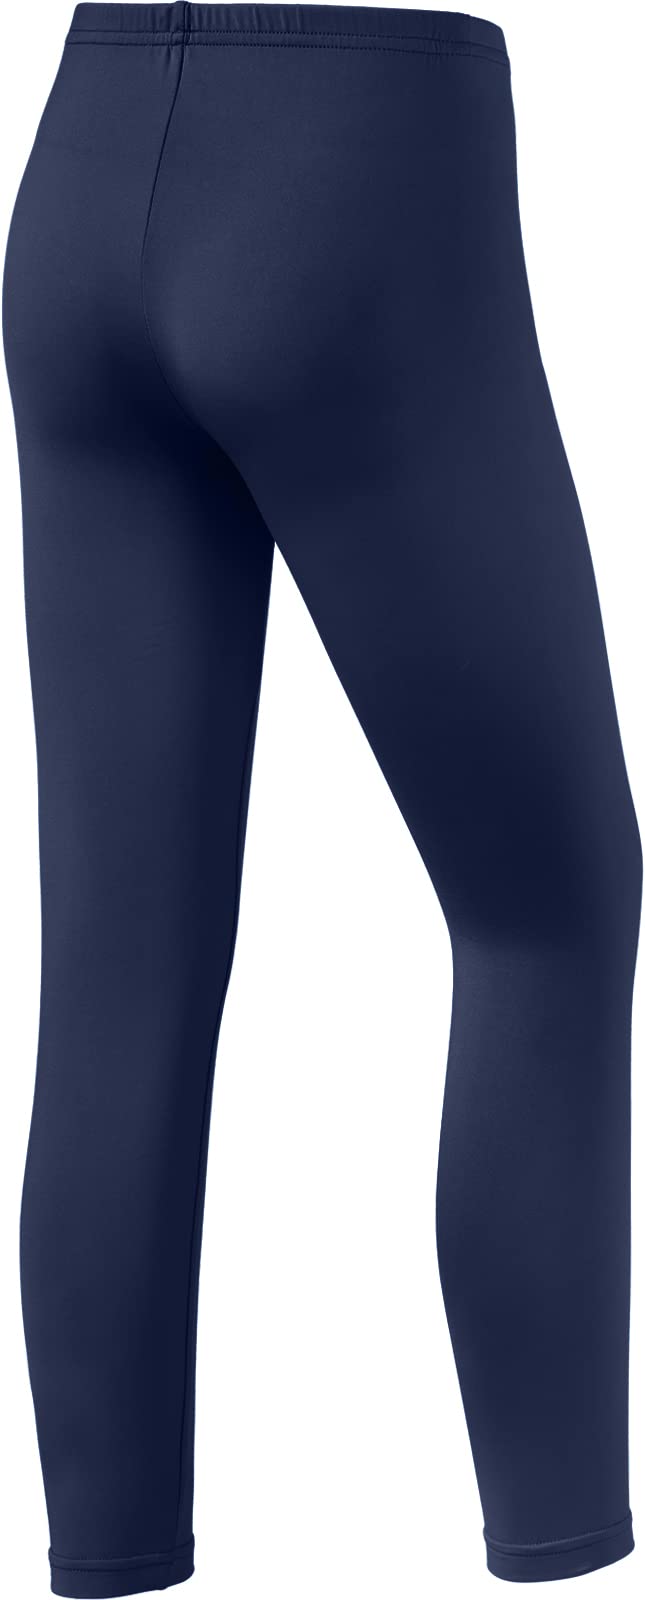 TSLA 1 or 2 Pack Kid's & Boys & Girls Thermal Compression Pants, Athletic Sports Leggings & Running Tights Bottoms